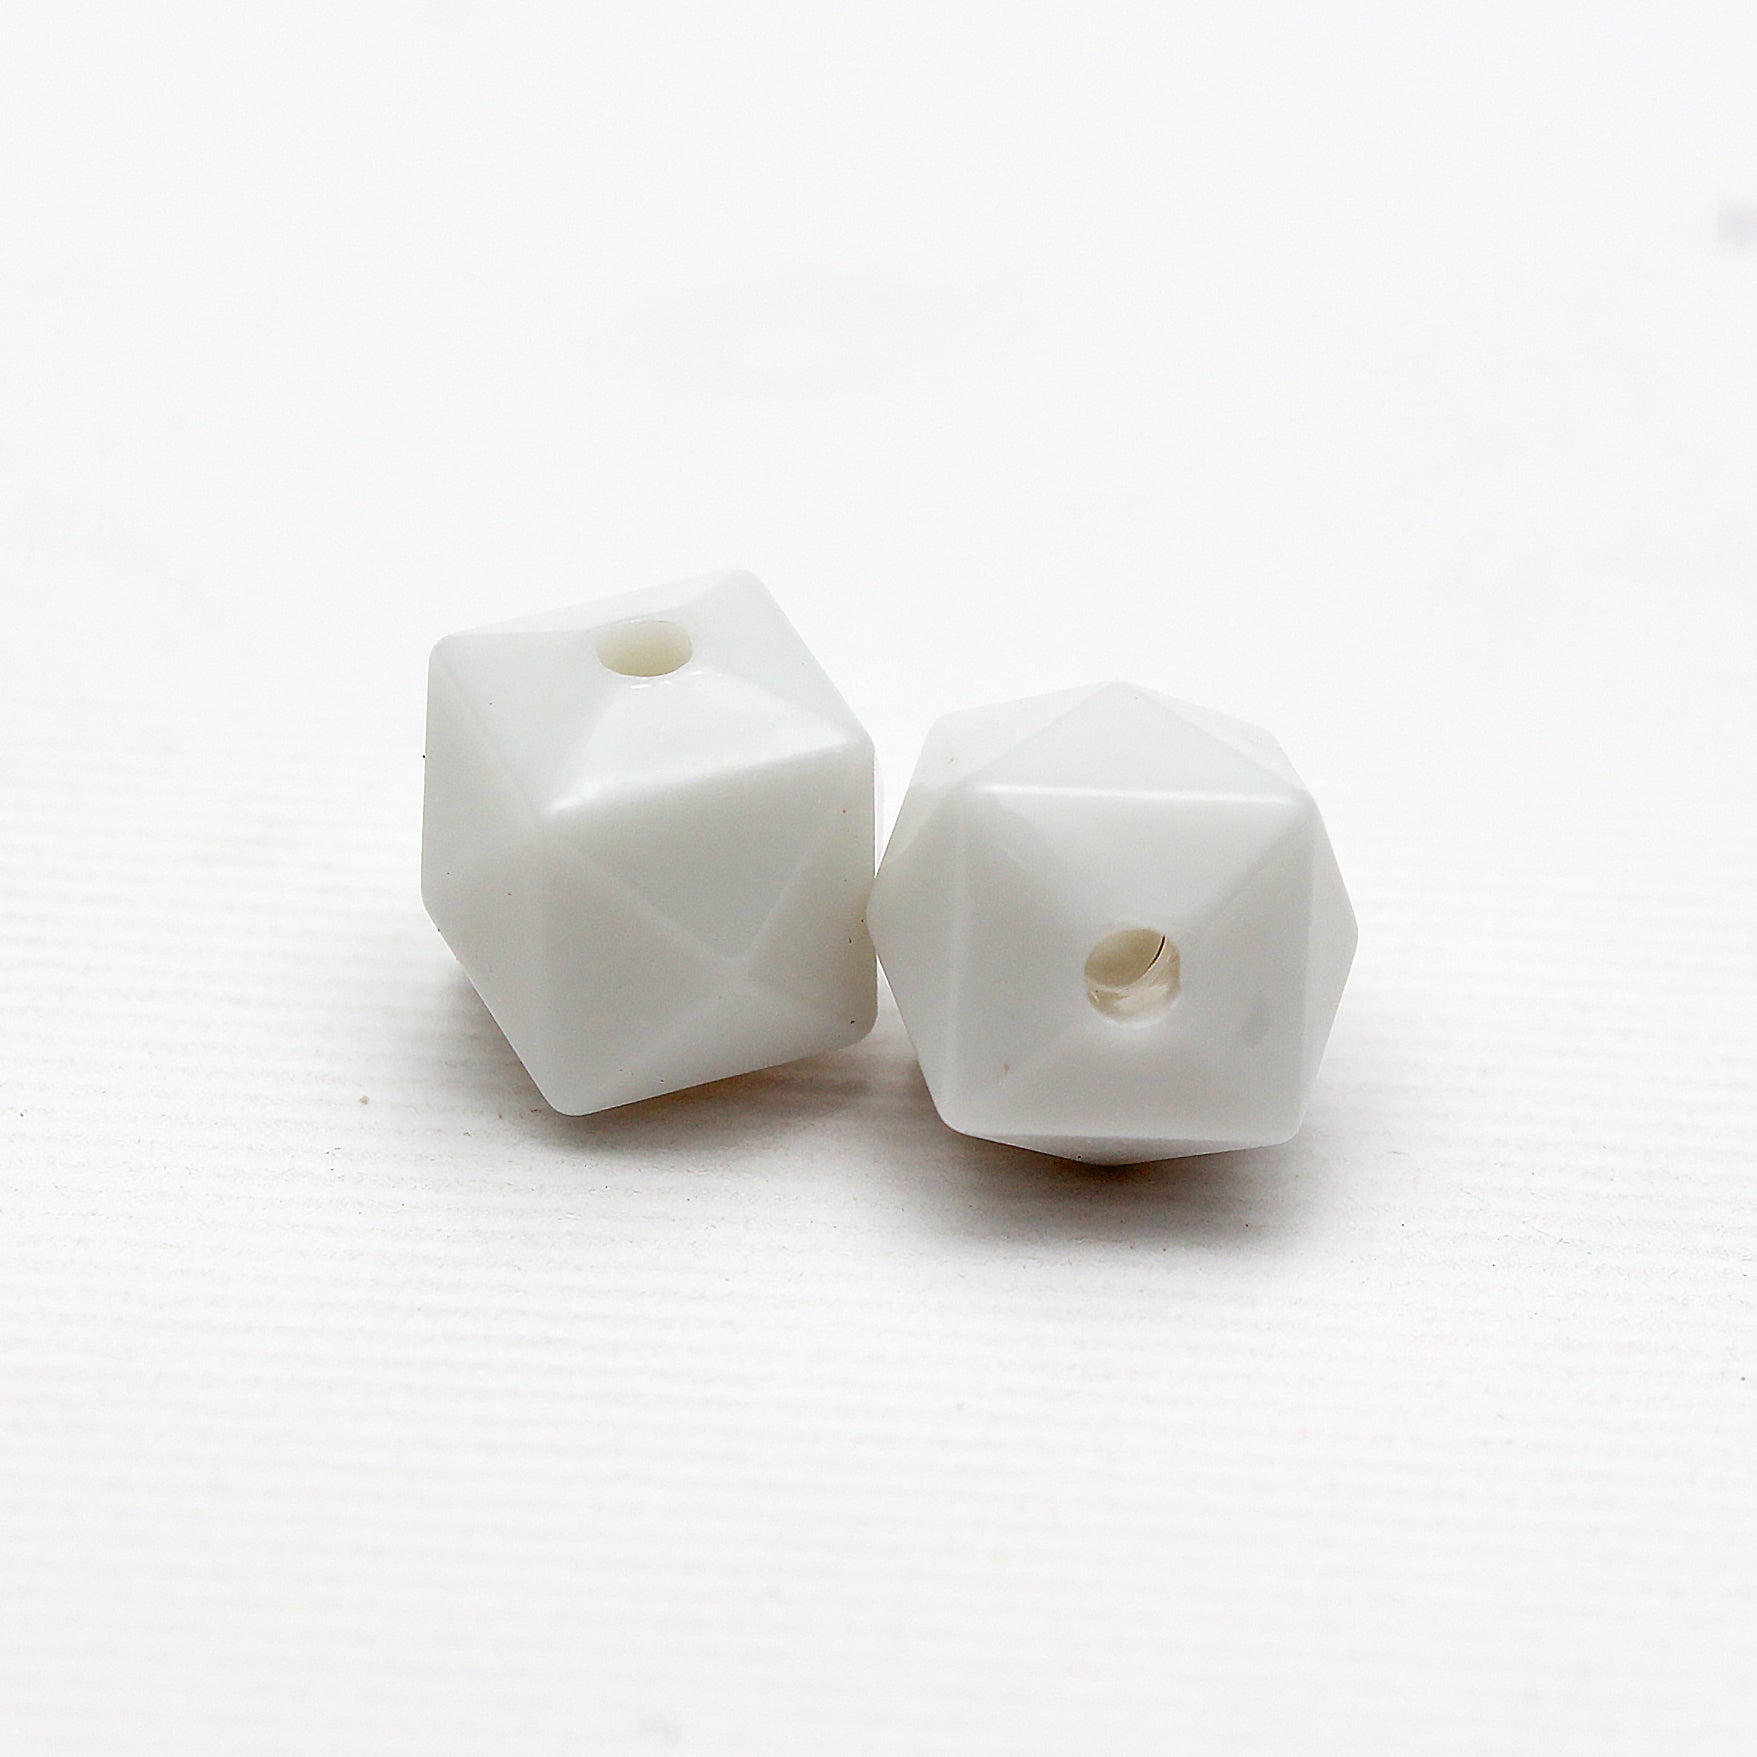 Beads Bright White Faceted Cube 9Mm X 9Mm 30G Pb Ib